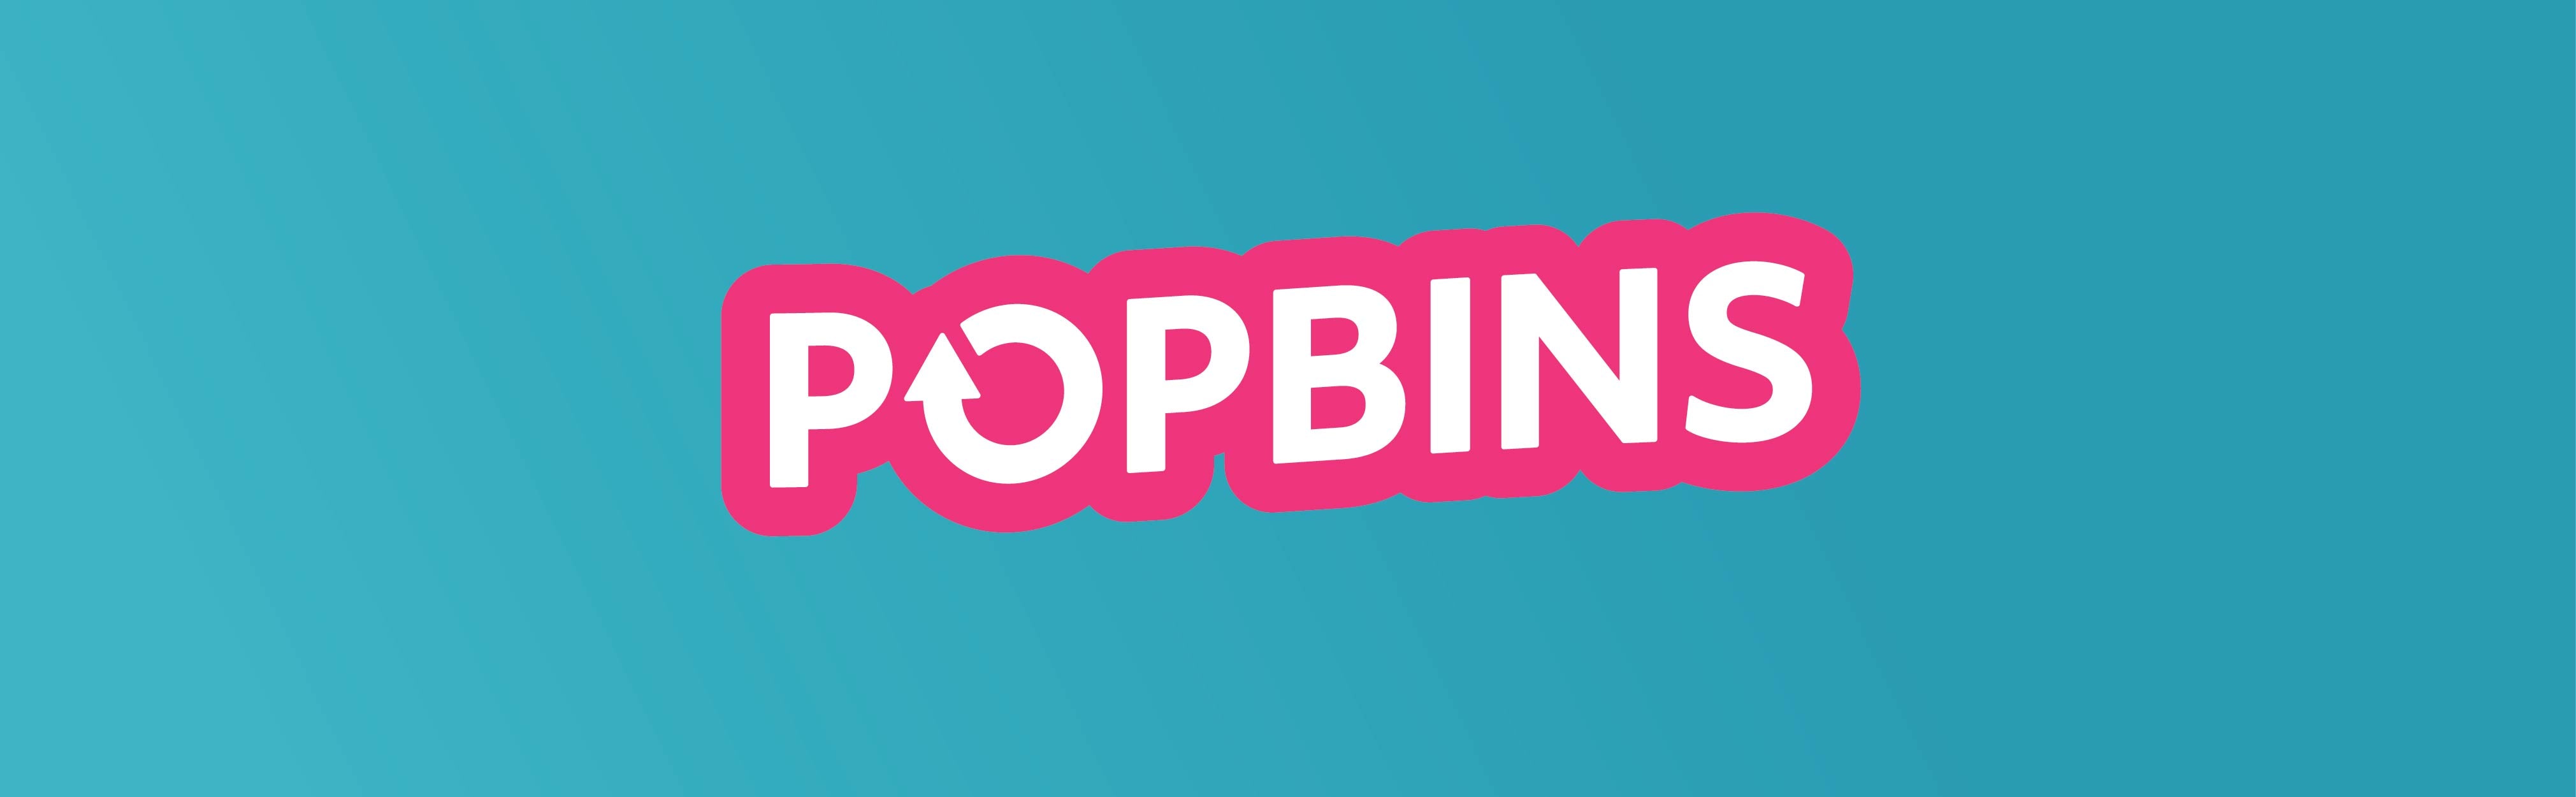 Products – POPBINS